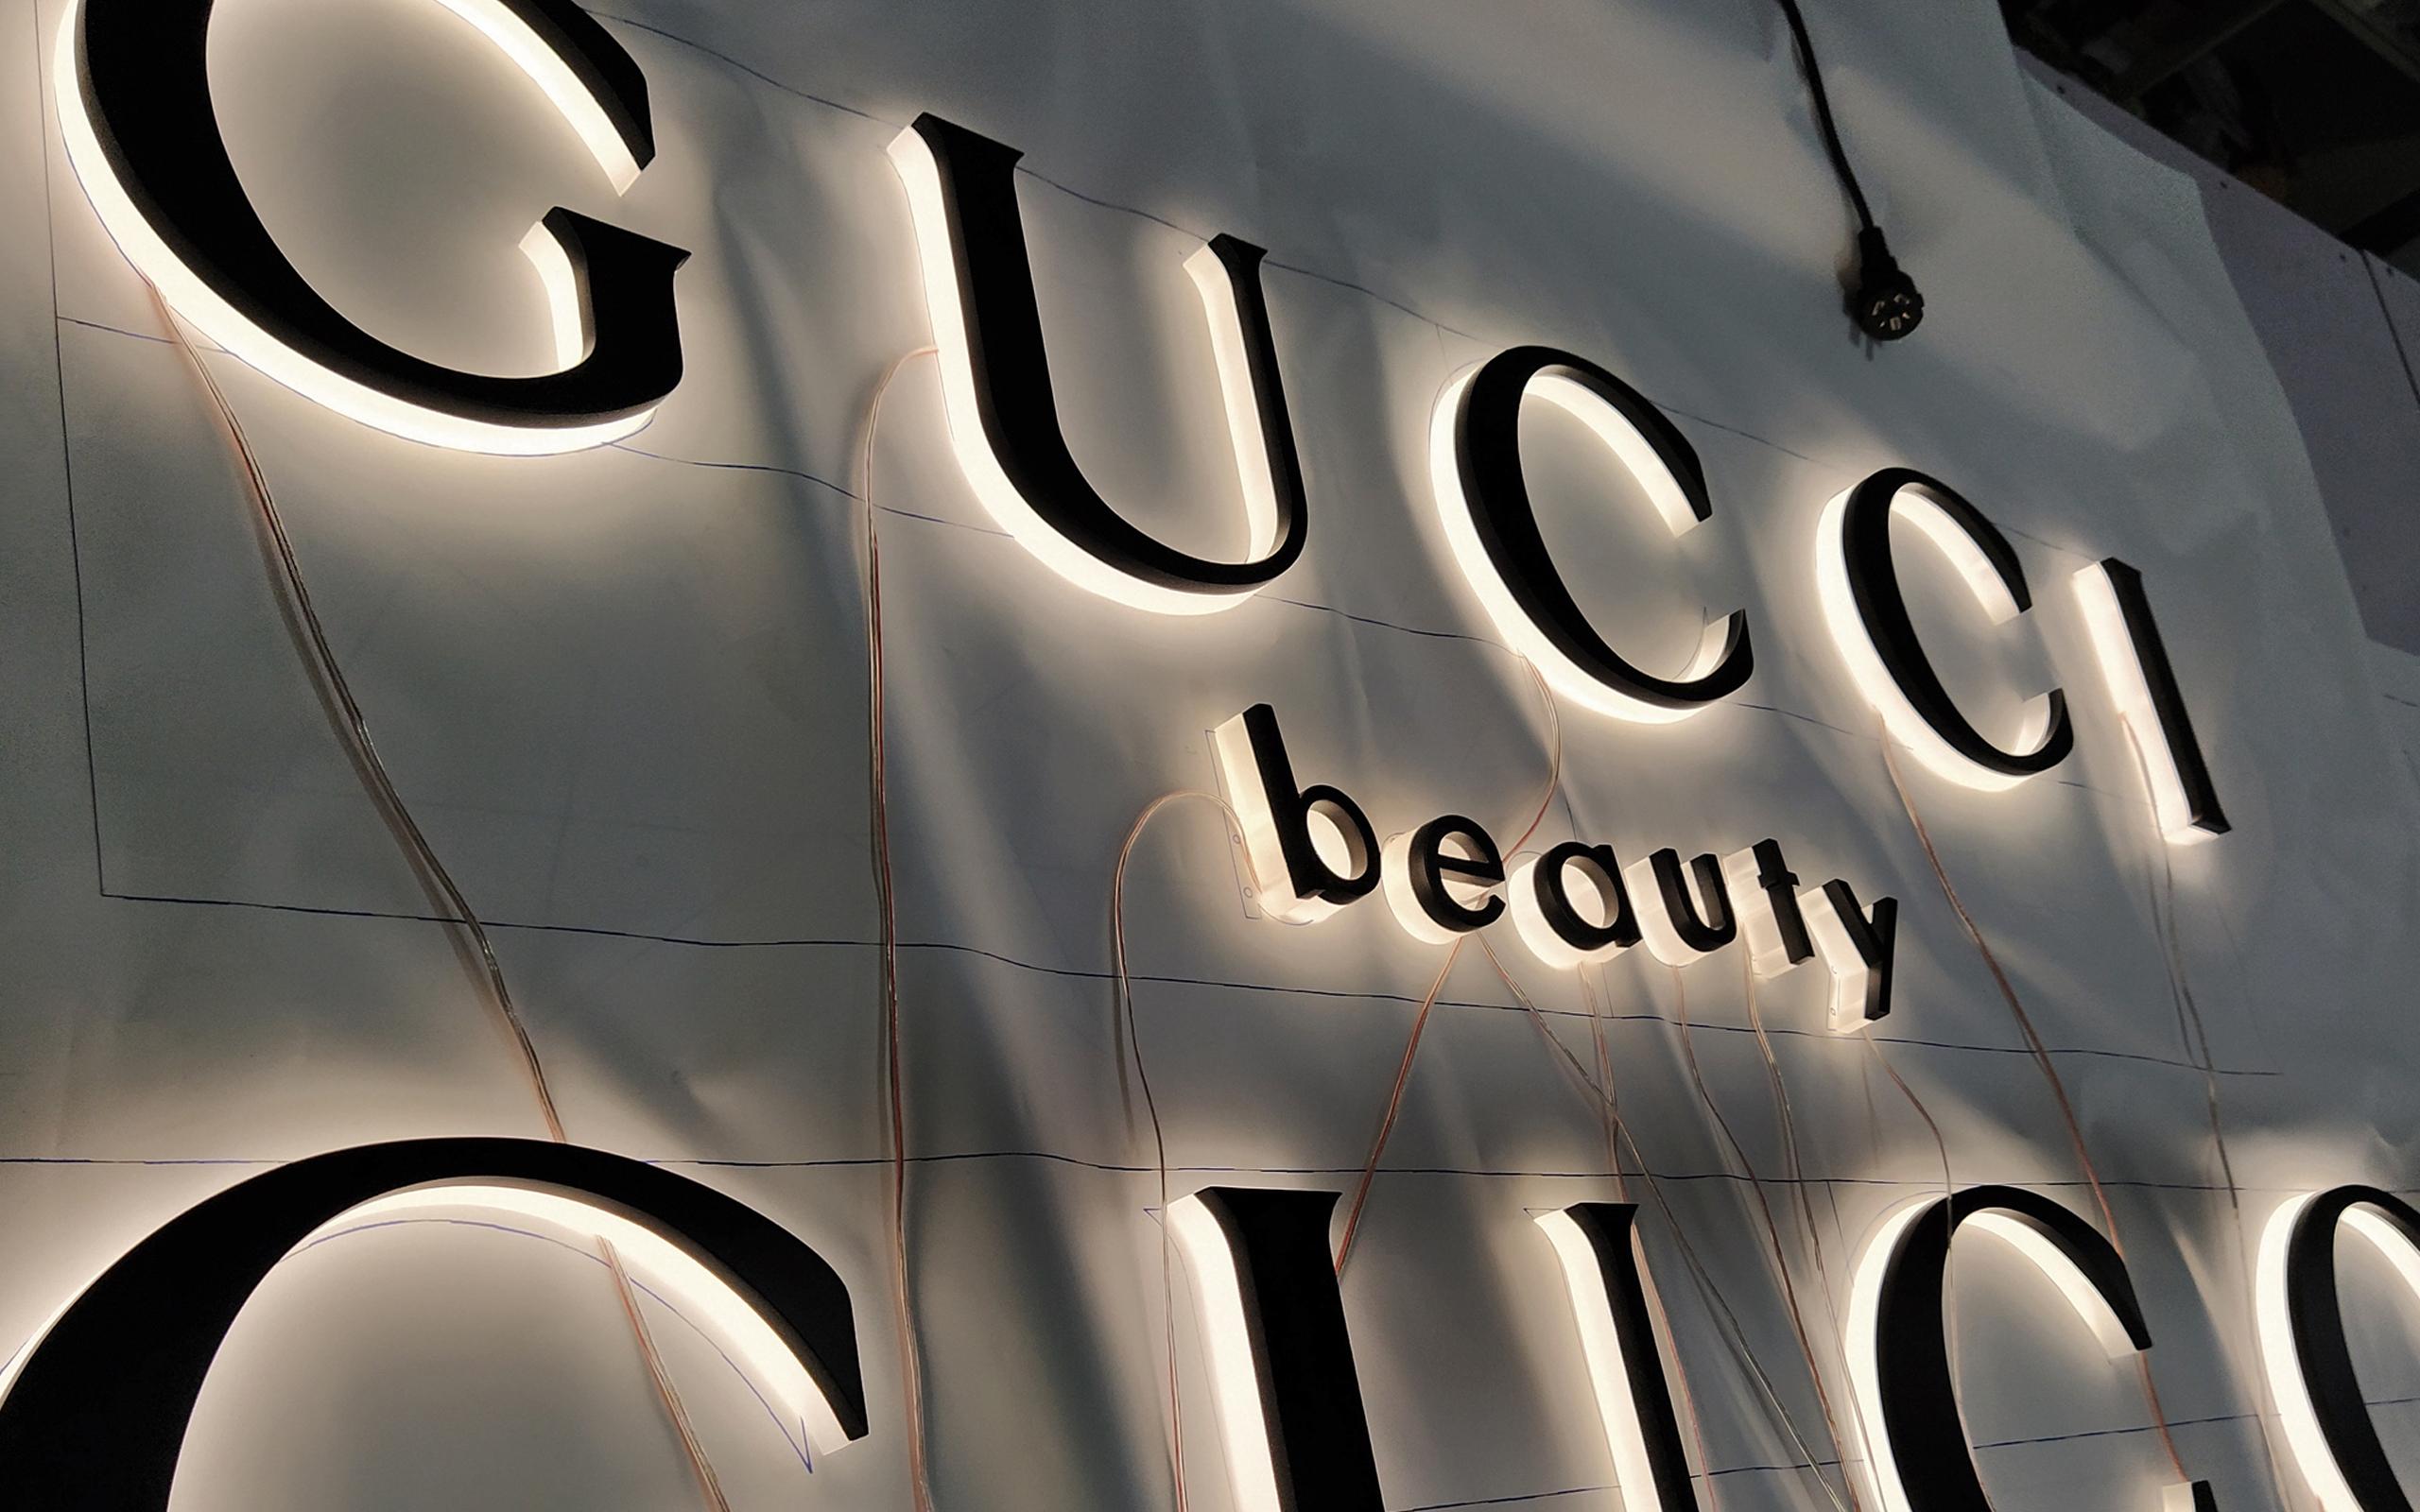 Gucci Halo illumnated Glowing Letters